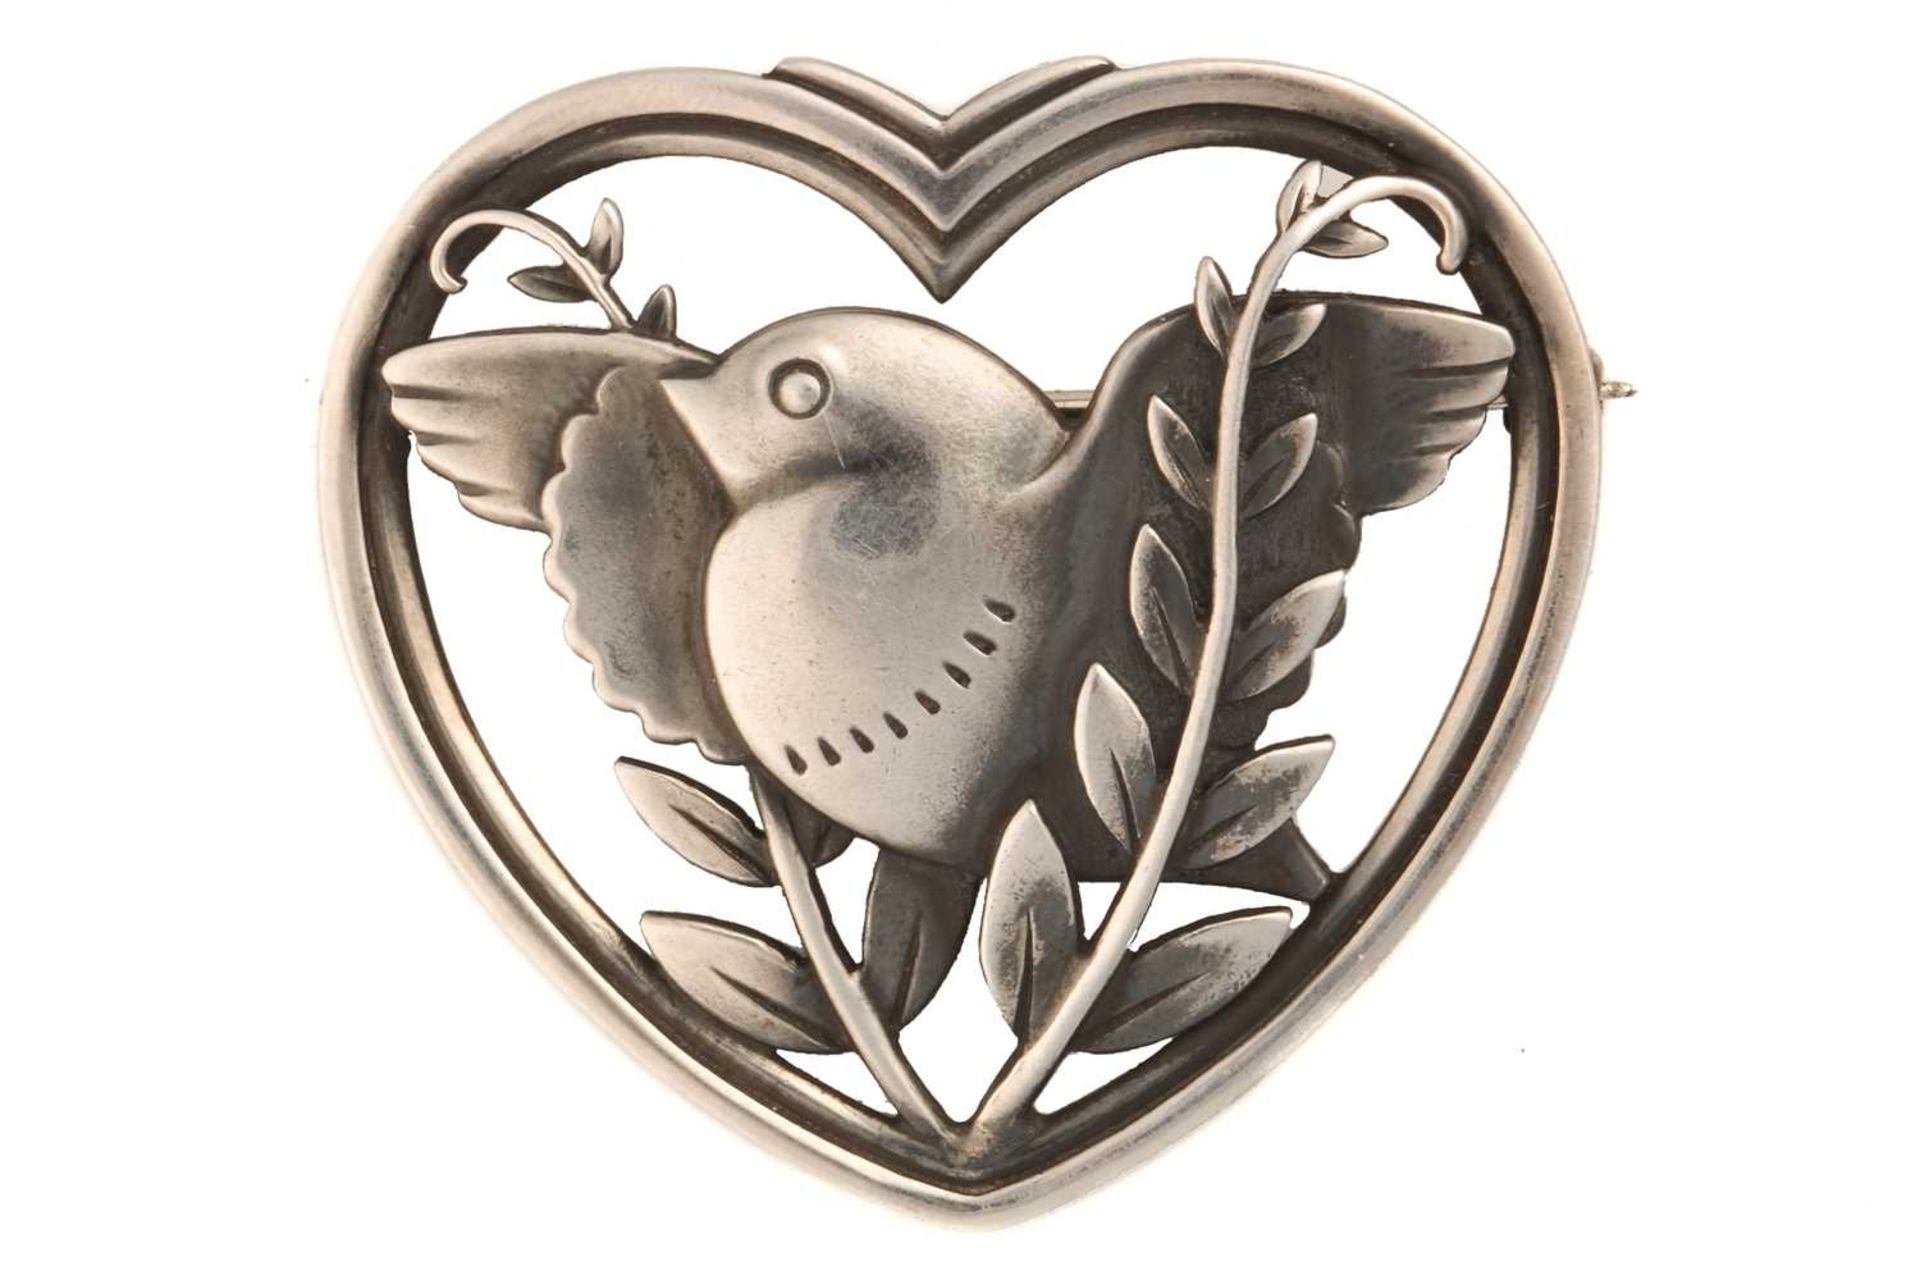 Georg Jensen - a heart-shaped brooch, depicting a flying dove with olive branches, fitted with